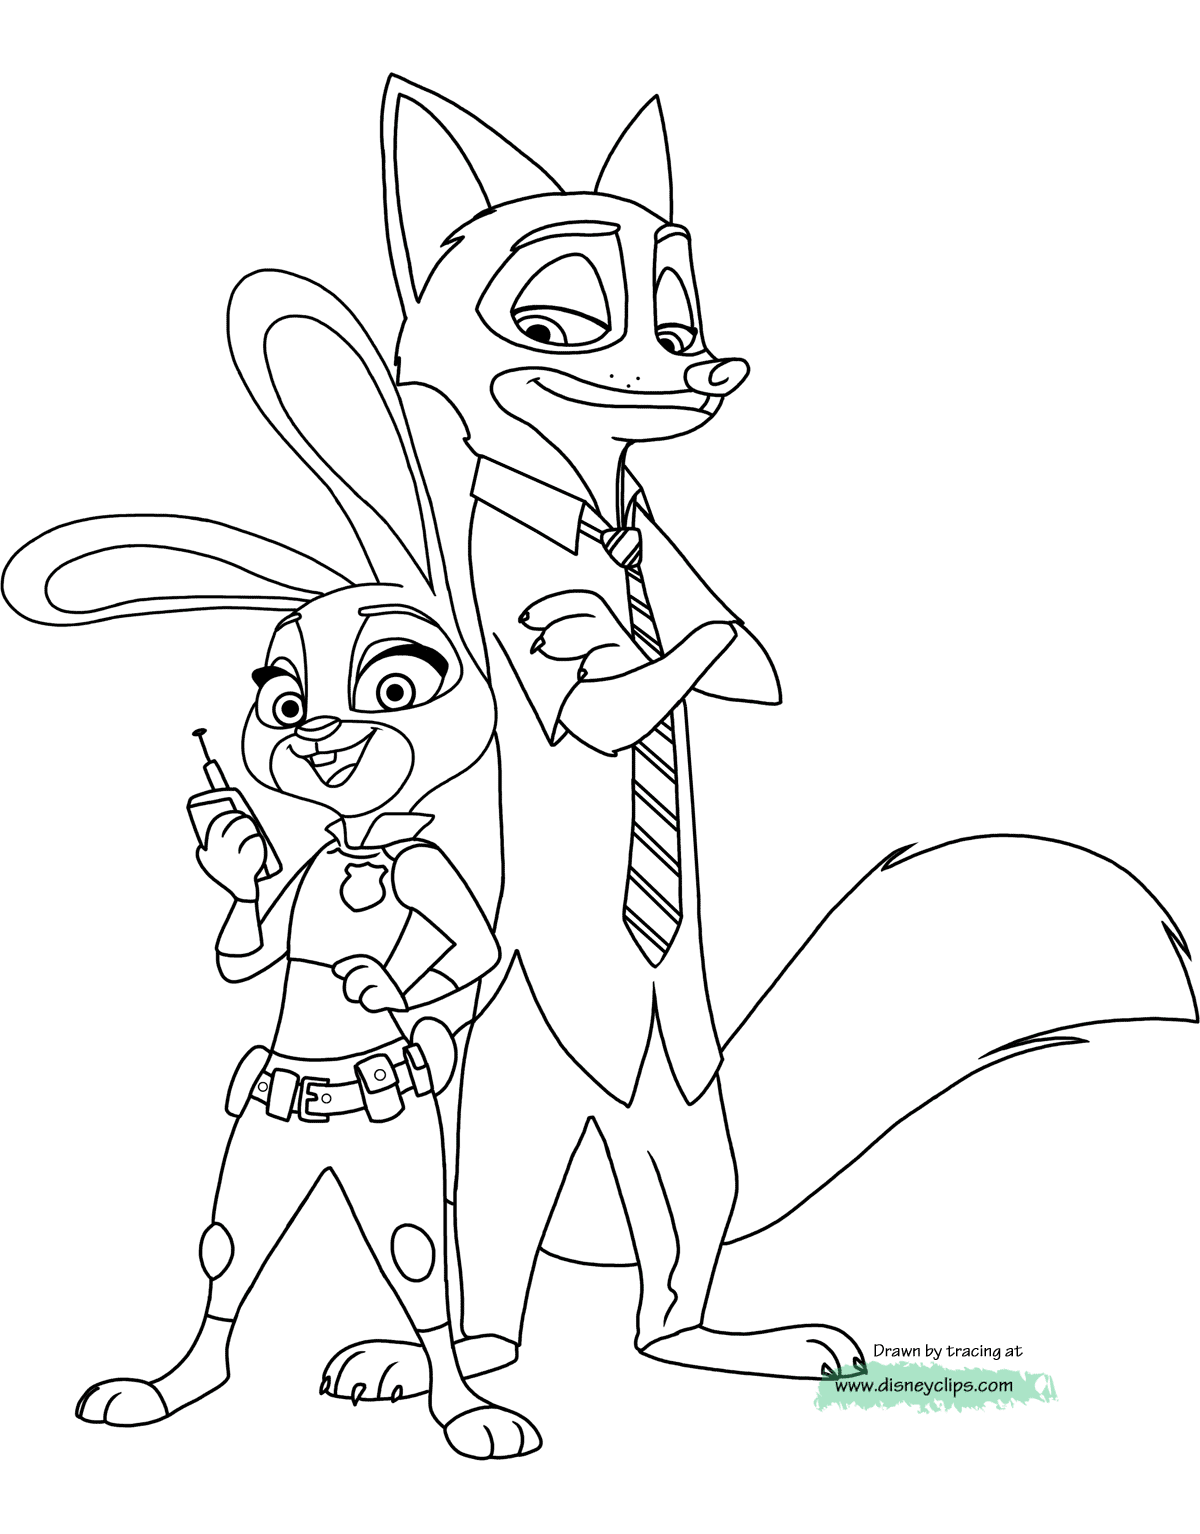 Free Printable Zootopia Coloring Sheets And Matching Game Any Tots Zootopia Coloring Pages Disney Coloring Pages Free Disney Coloring Pages